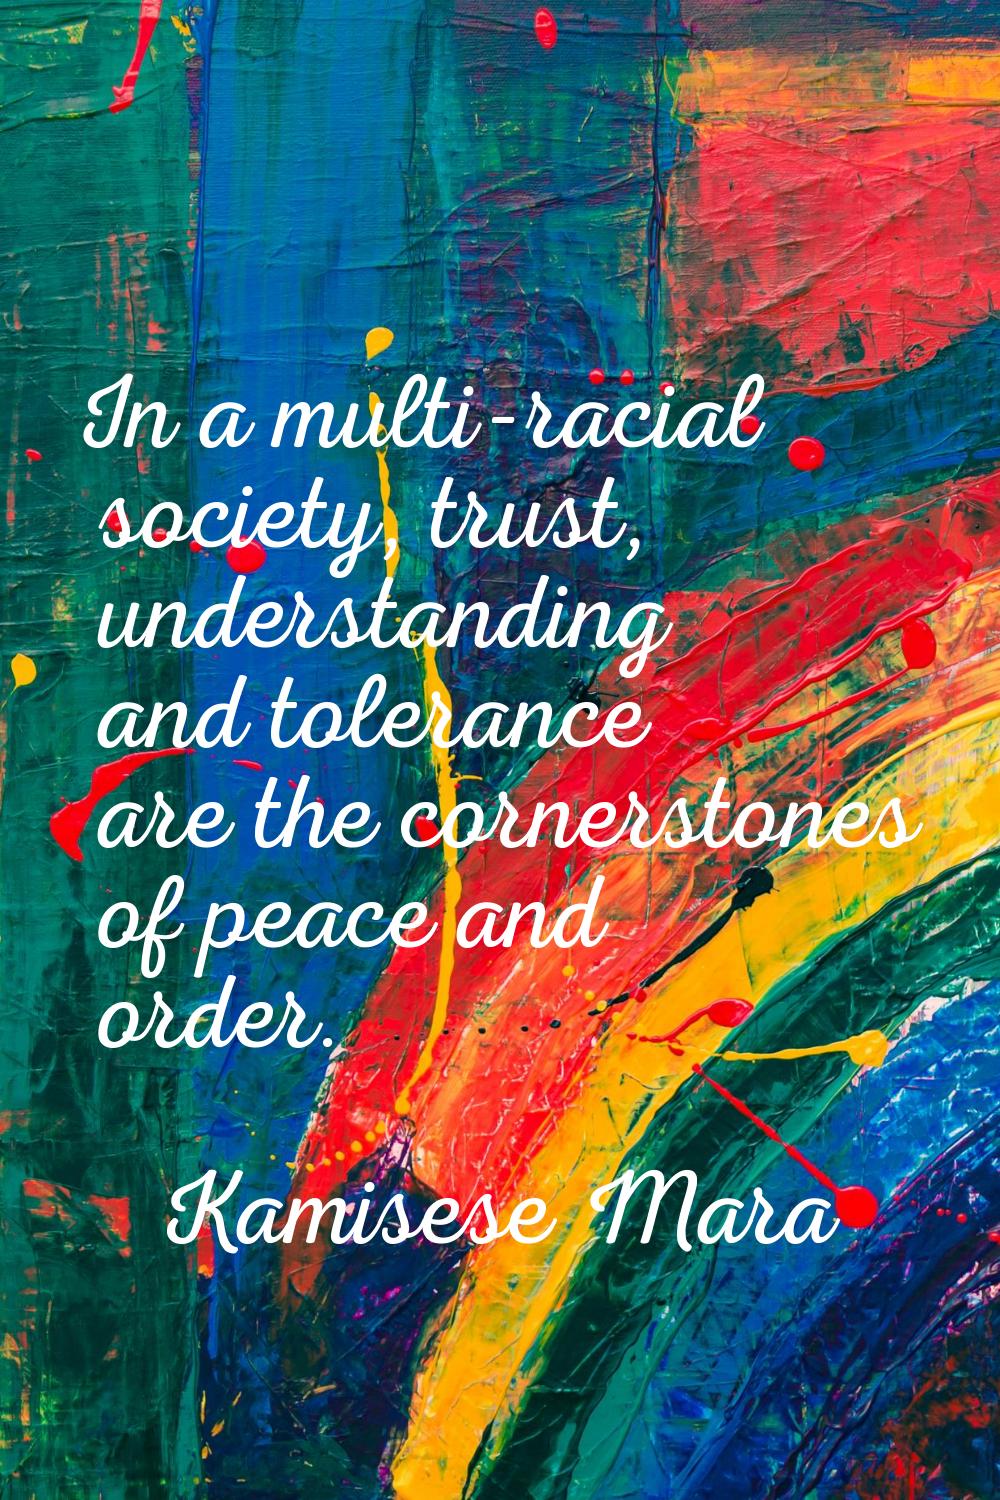 In a multi-racial society, trust, understanding and tolerance are the cornerstones of peace and ord